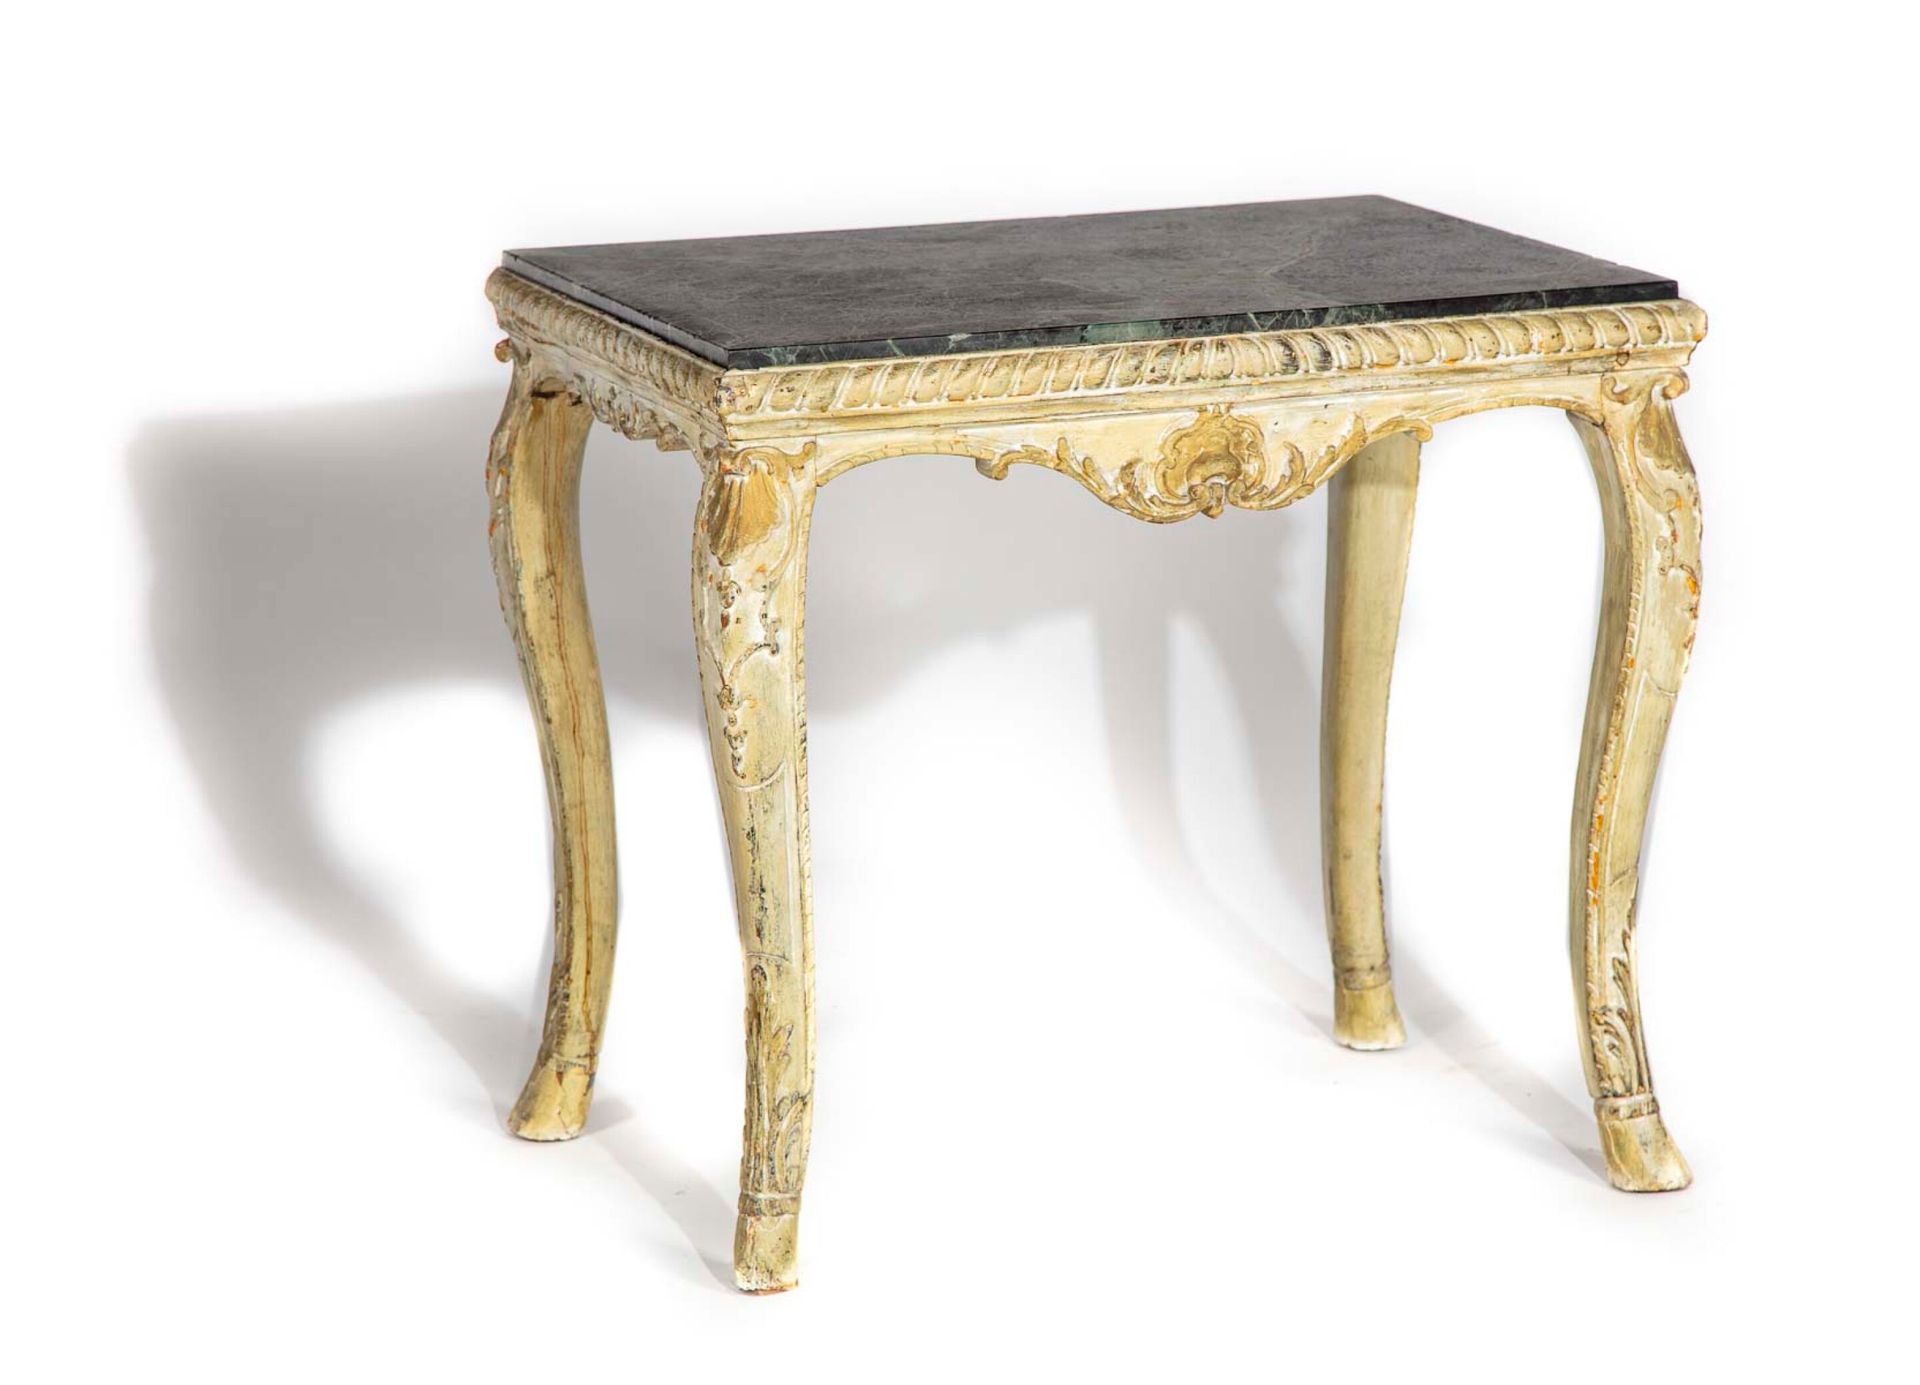 Null Painted wood coffee table with sea green marble top

In the Louis XV style
&hellip;